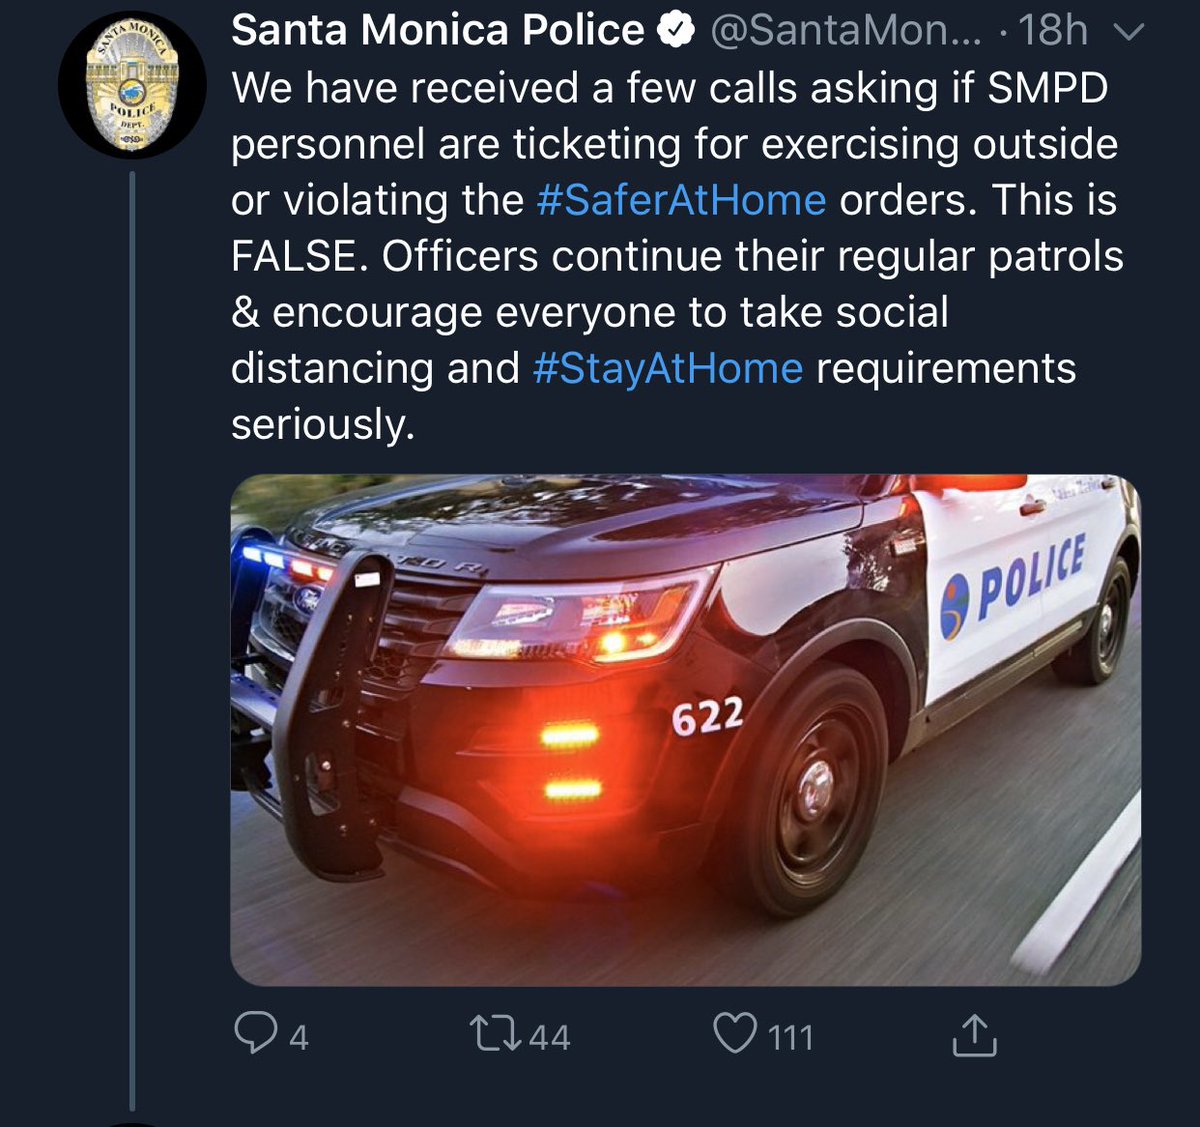 how do you get subtweeted by two different police departments in 24 hours lmfaoooooo